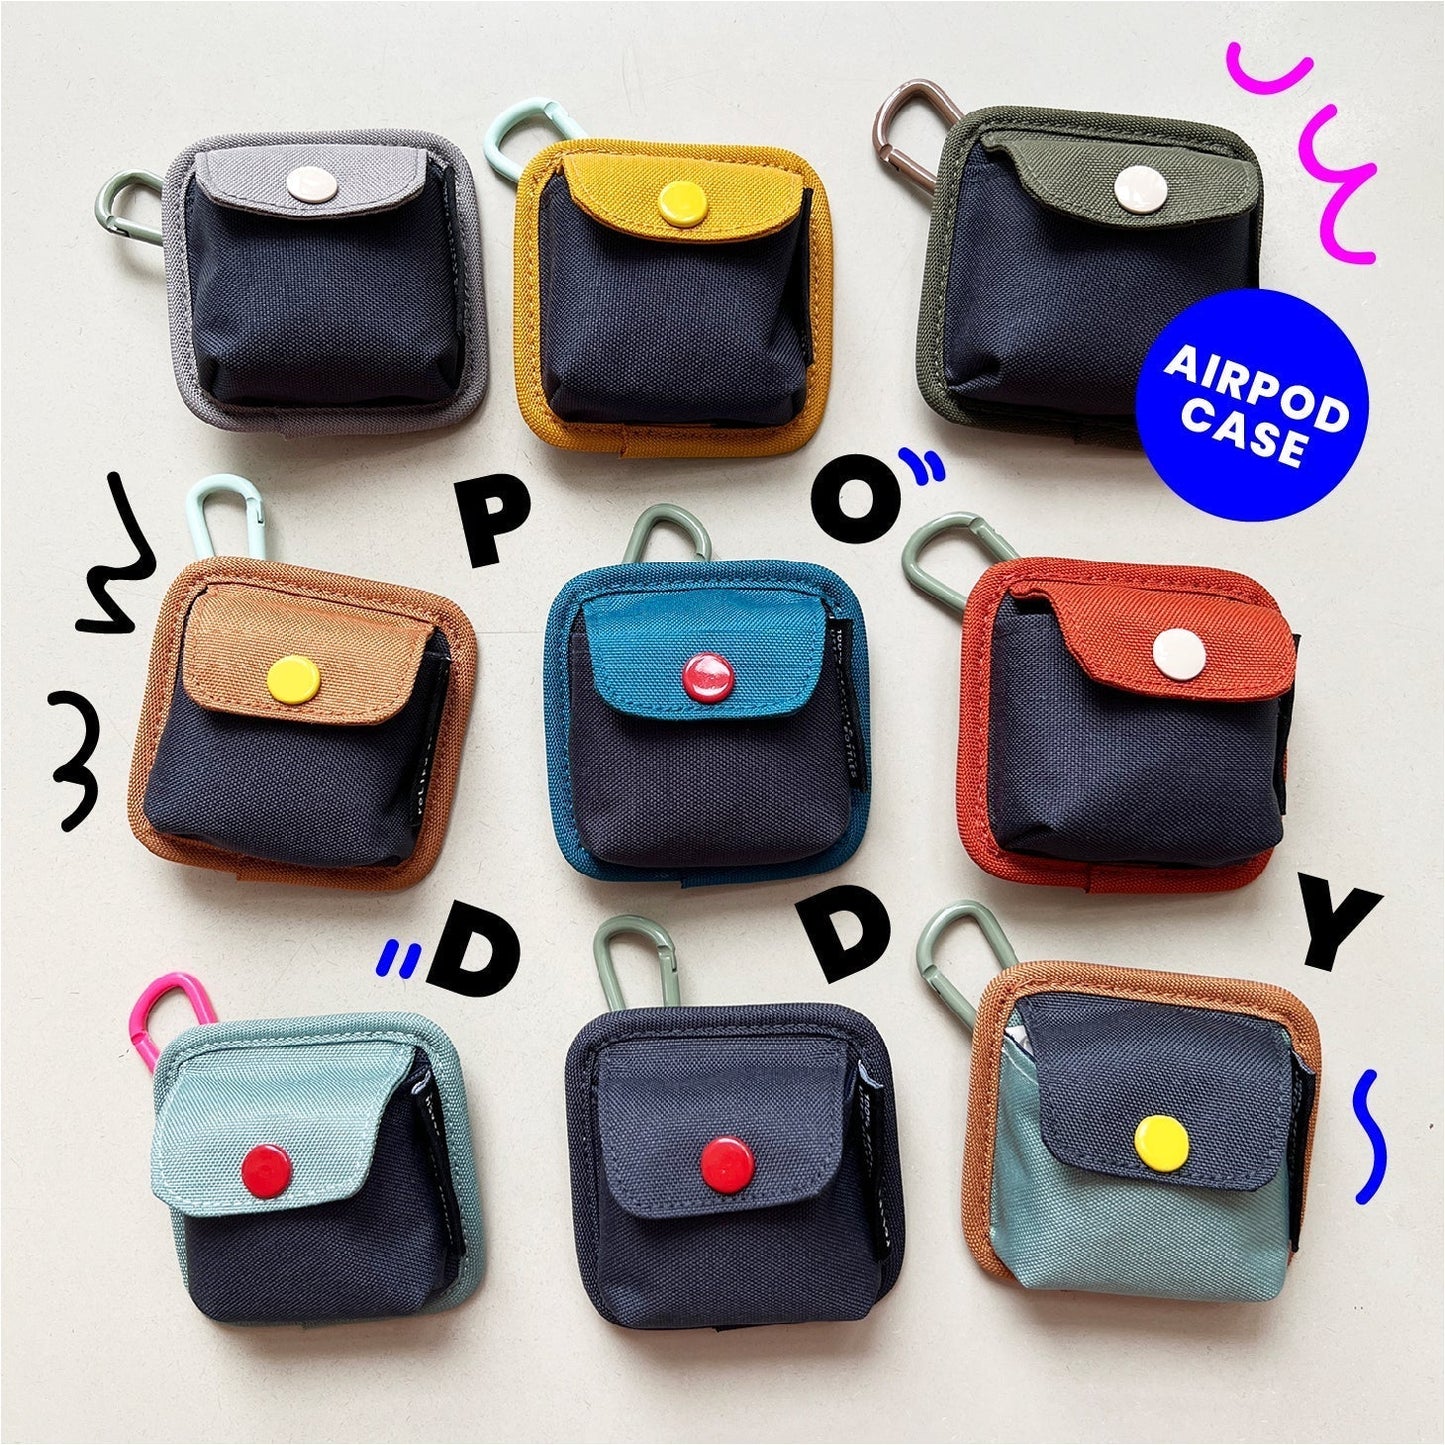 Poddy relife brick airpod pouch